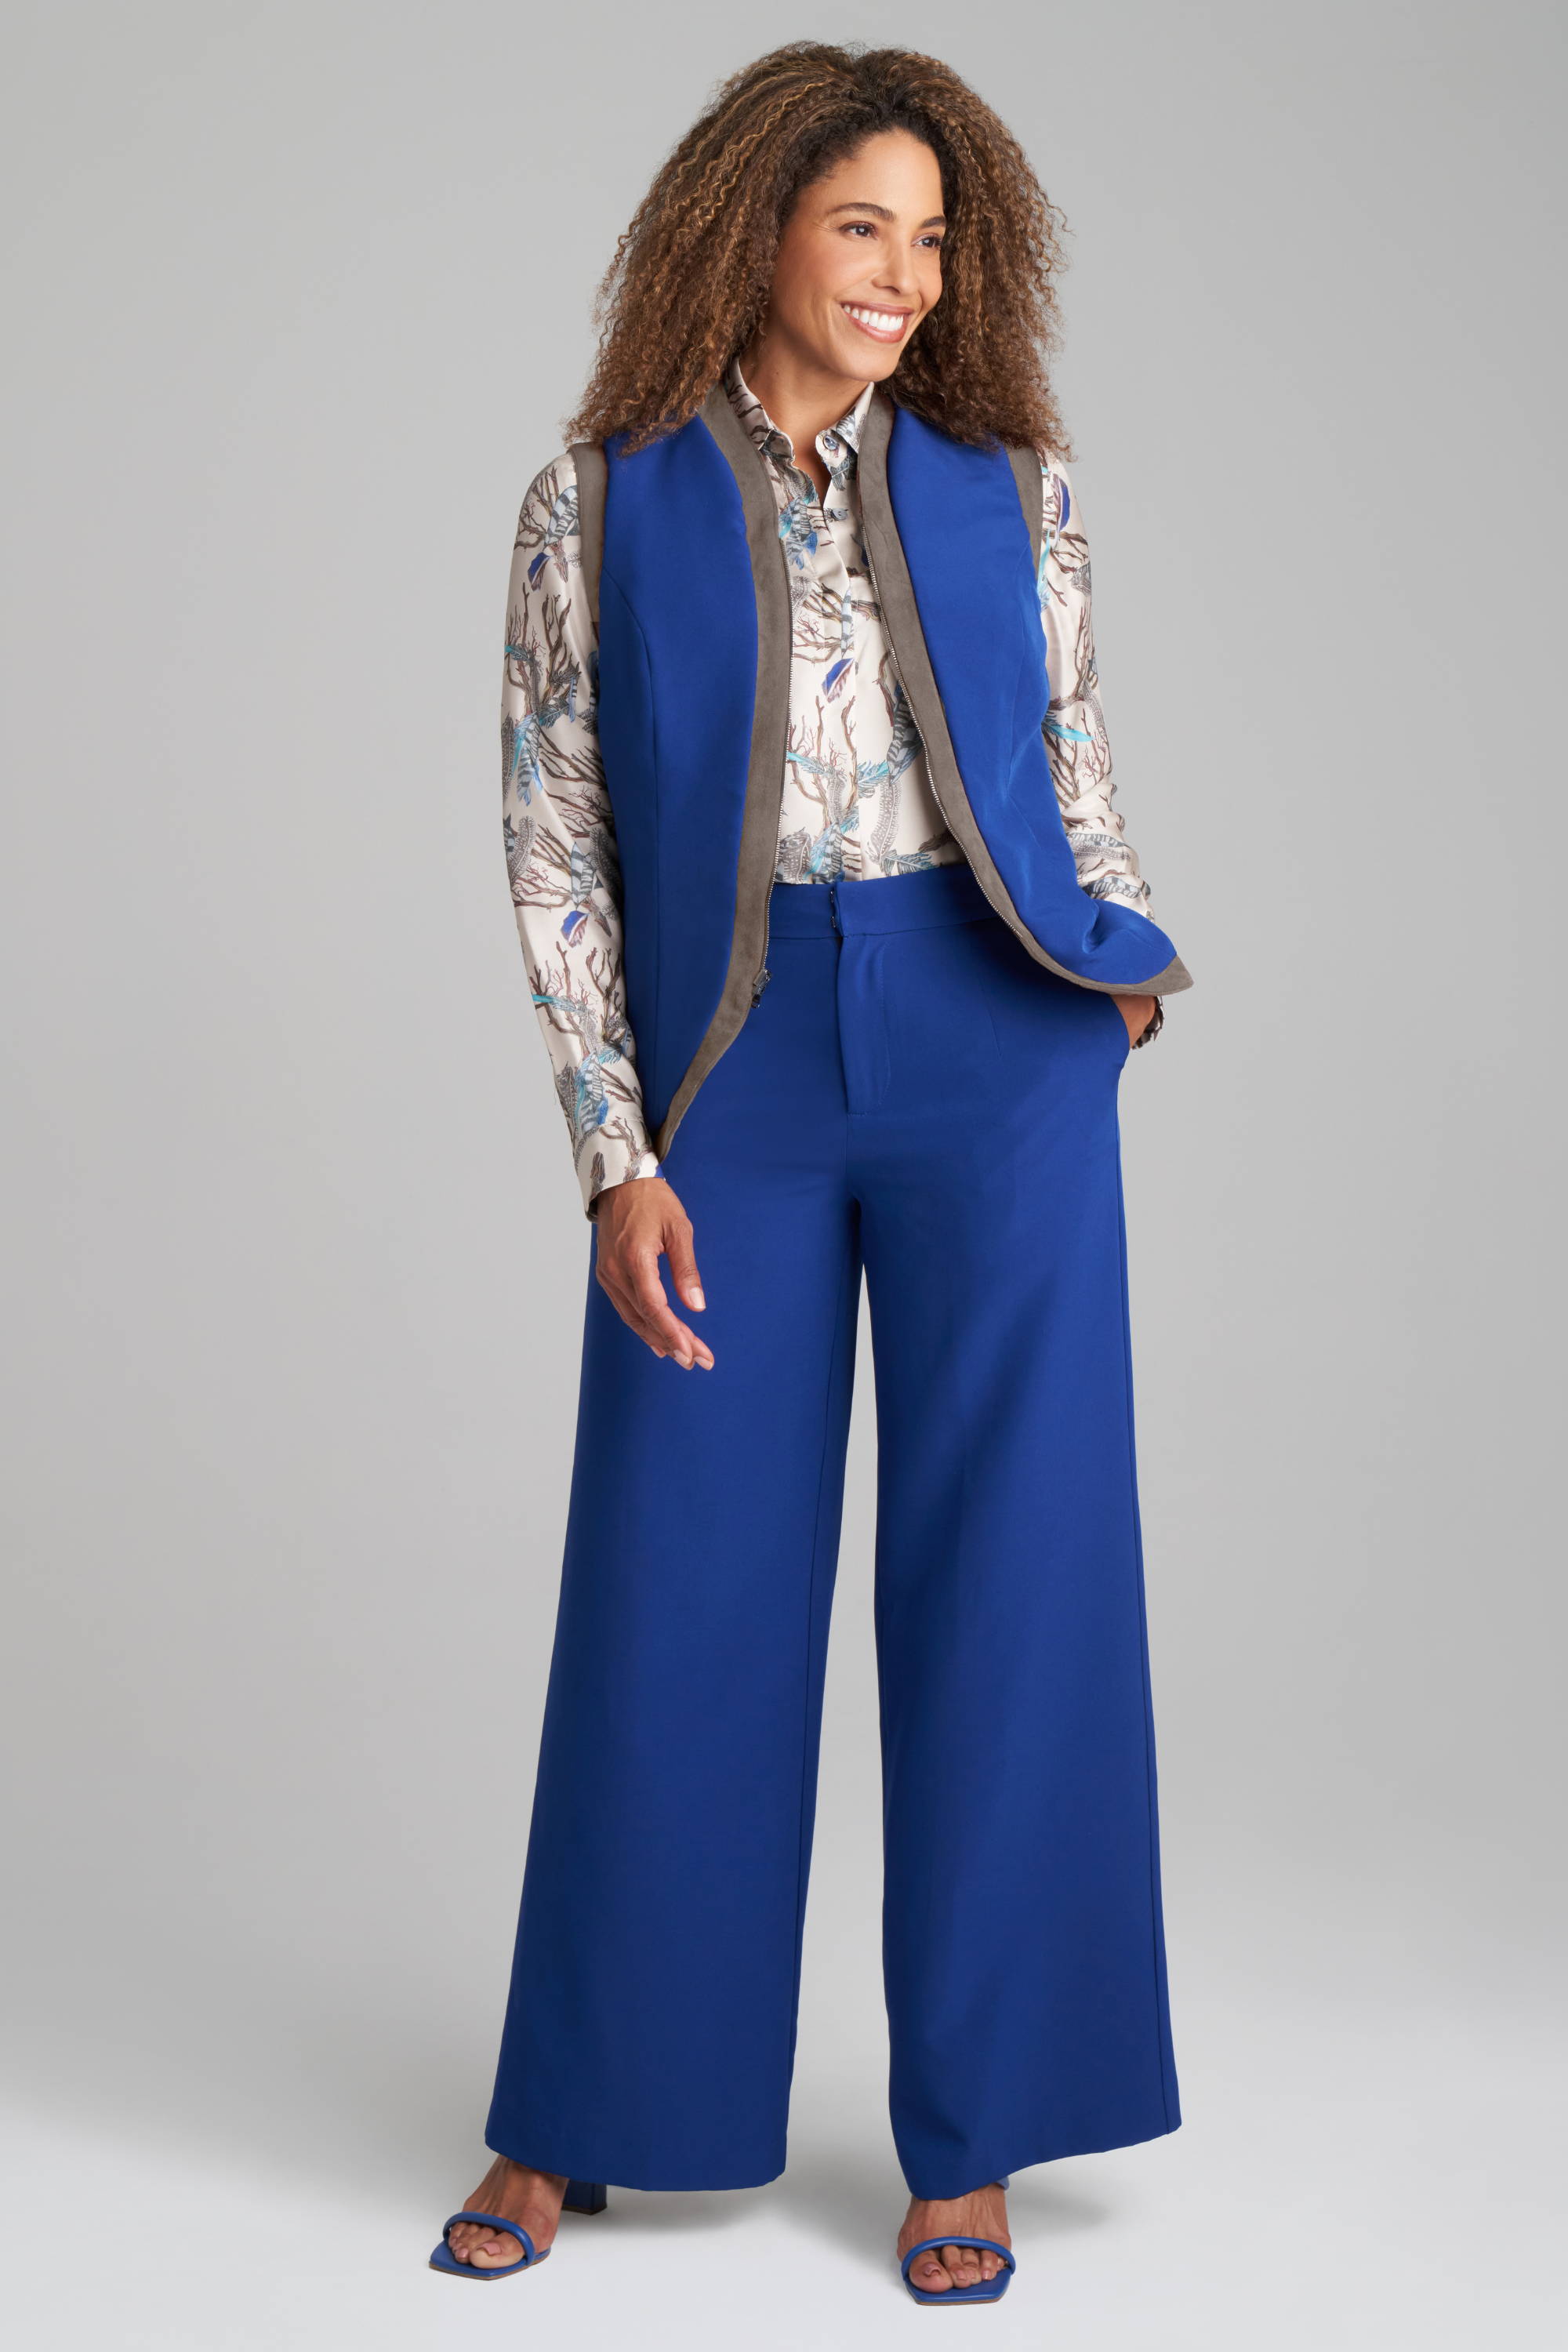 Woman wearing blue vest with feather printed silk shirt with blue pants by Ala von Auersperg